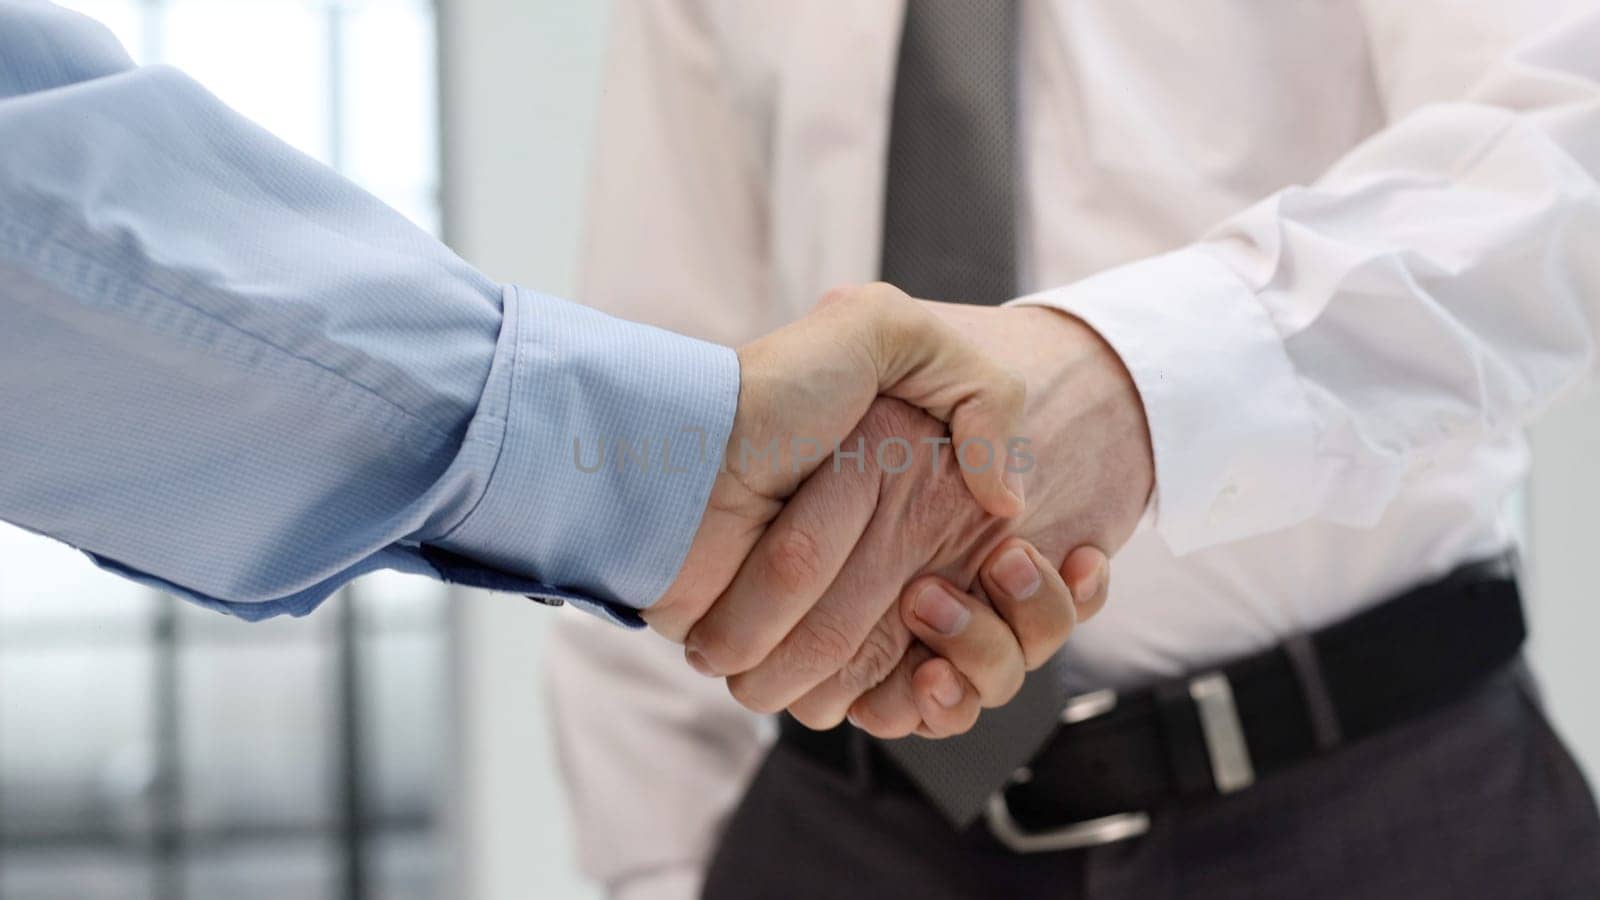 Handshake and congratulations after the transaction by Prosto